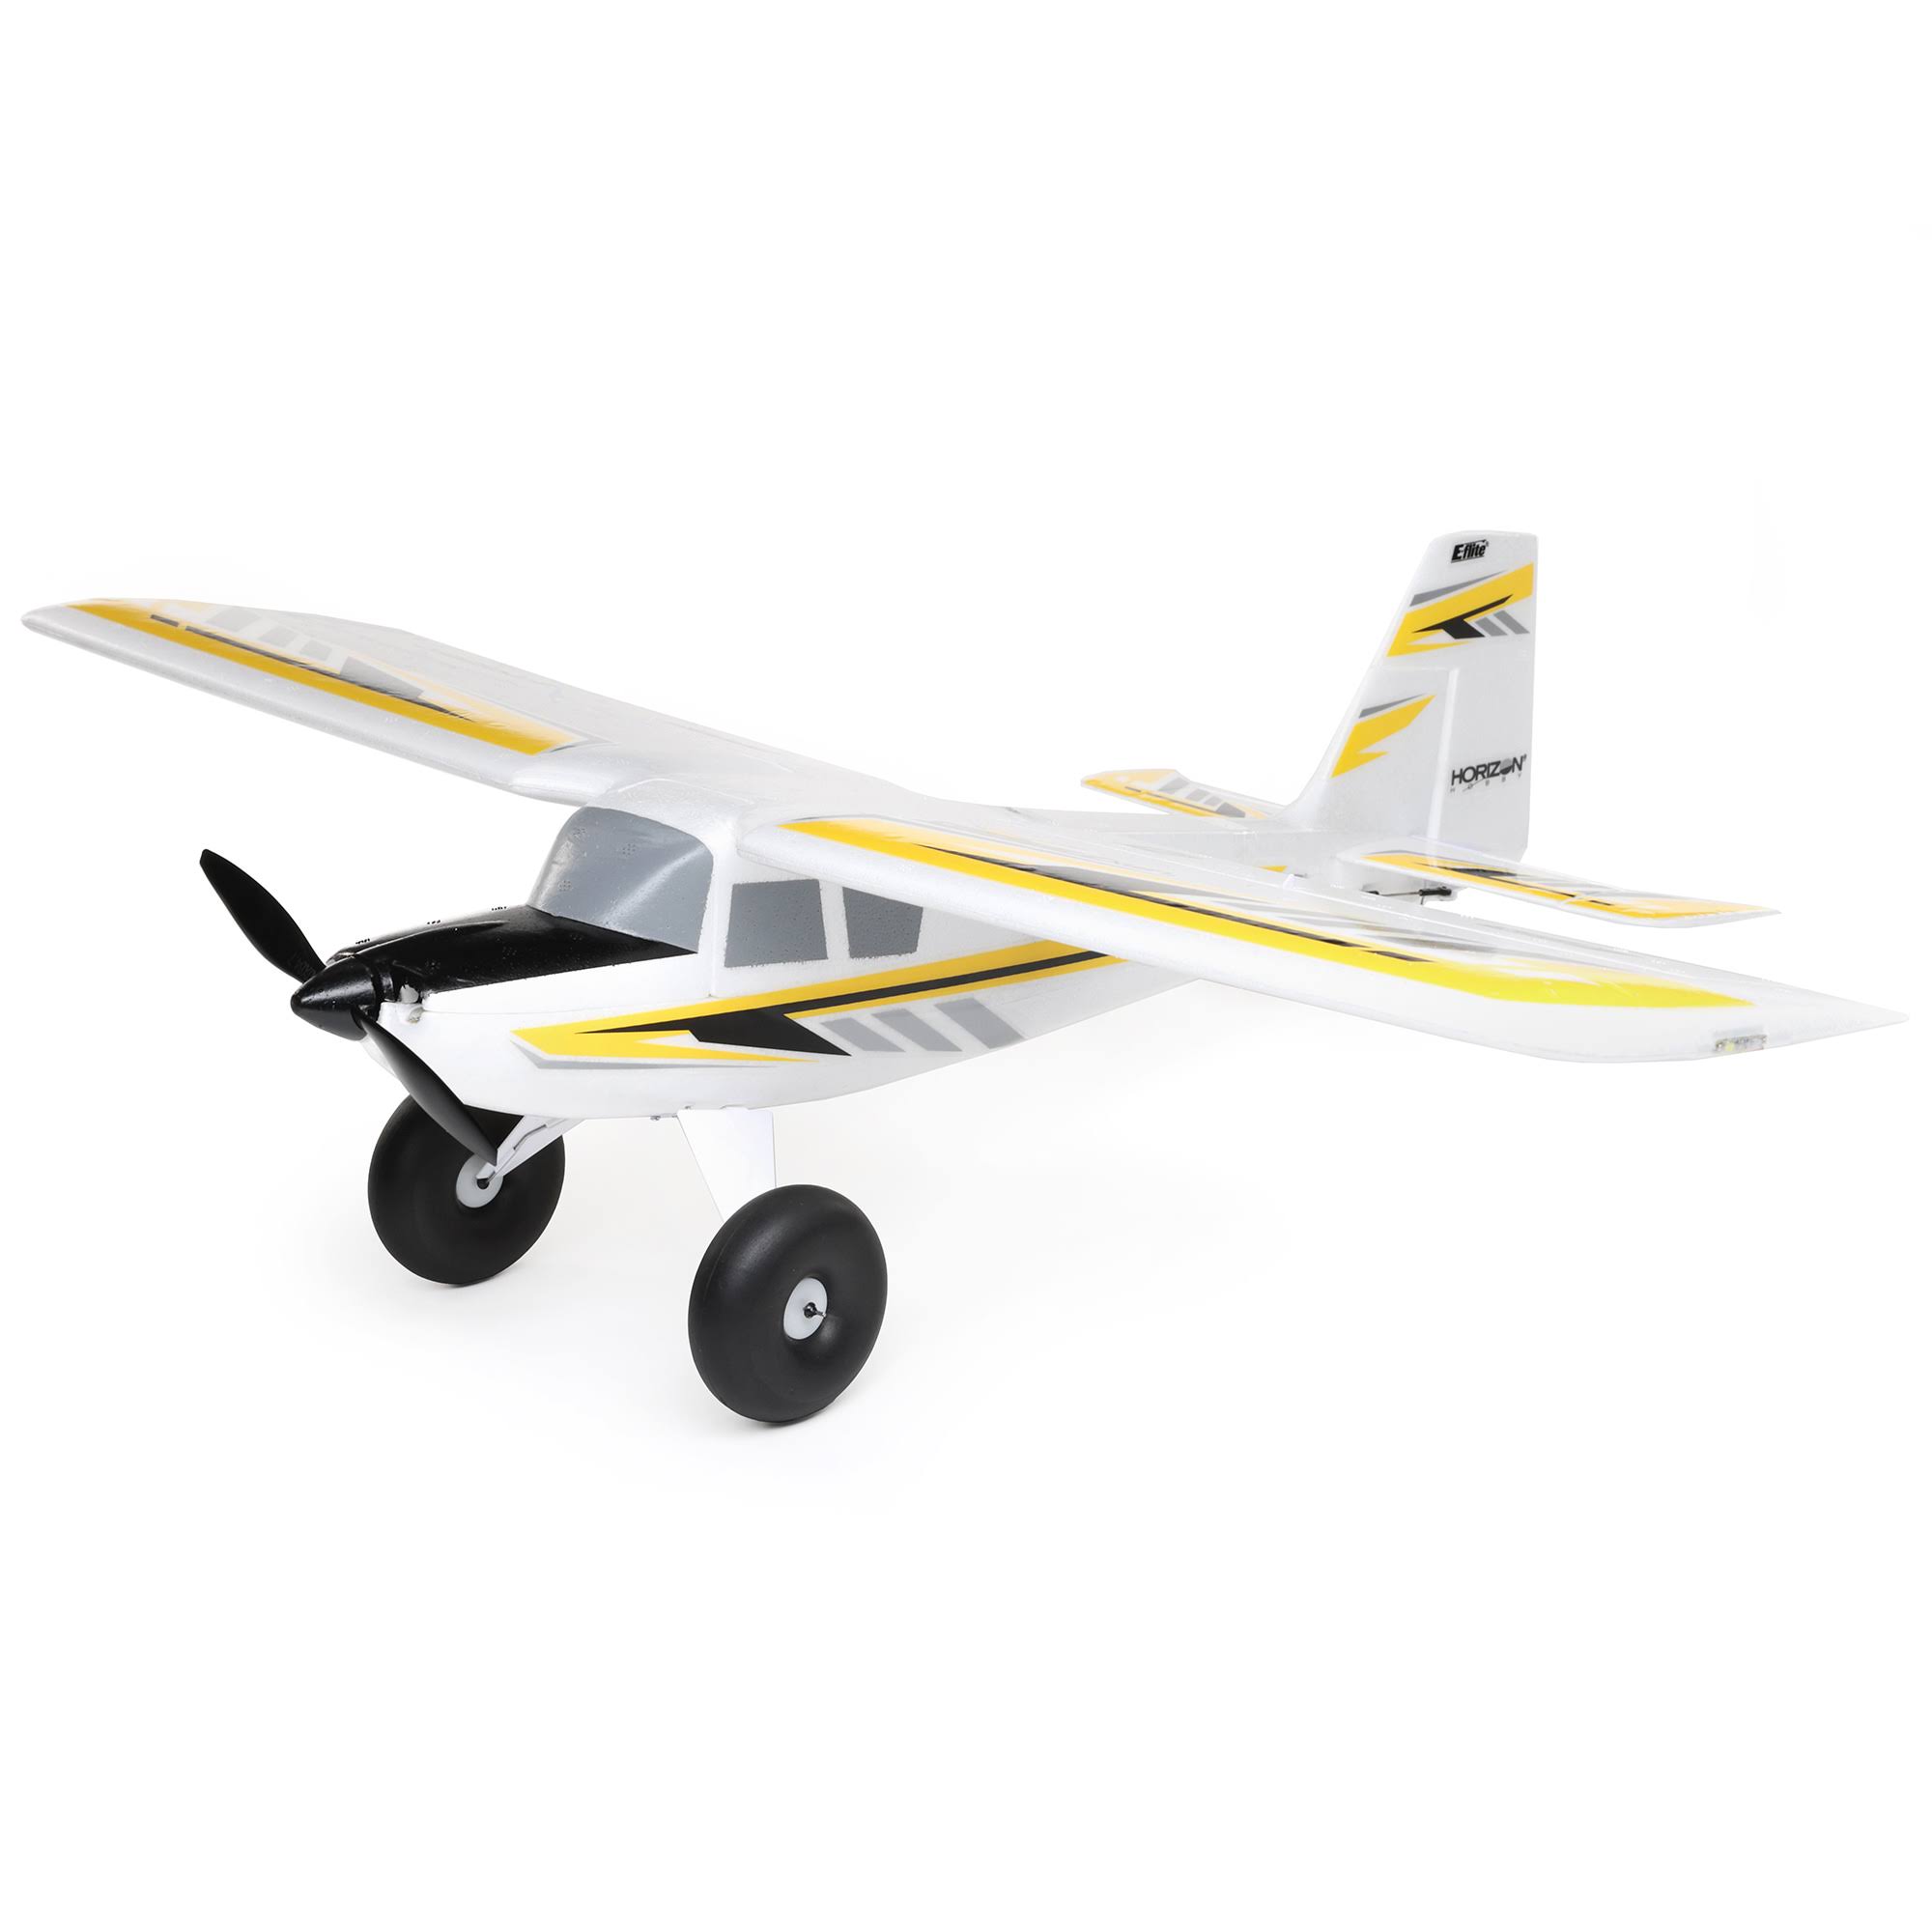 E Flite UMX Timber x BNF Basic with AS3X and Safe Select 570mm